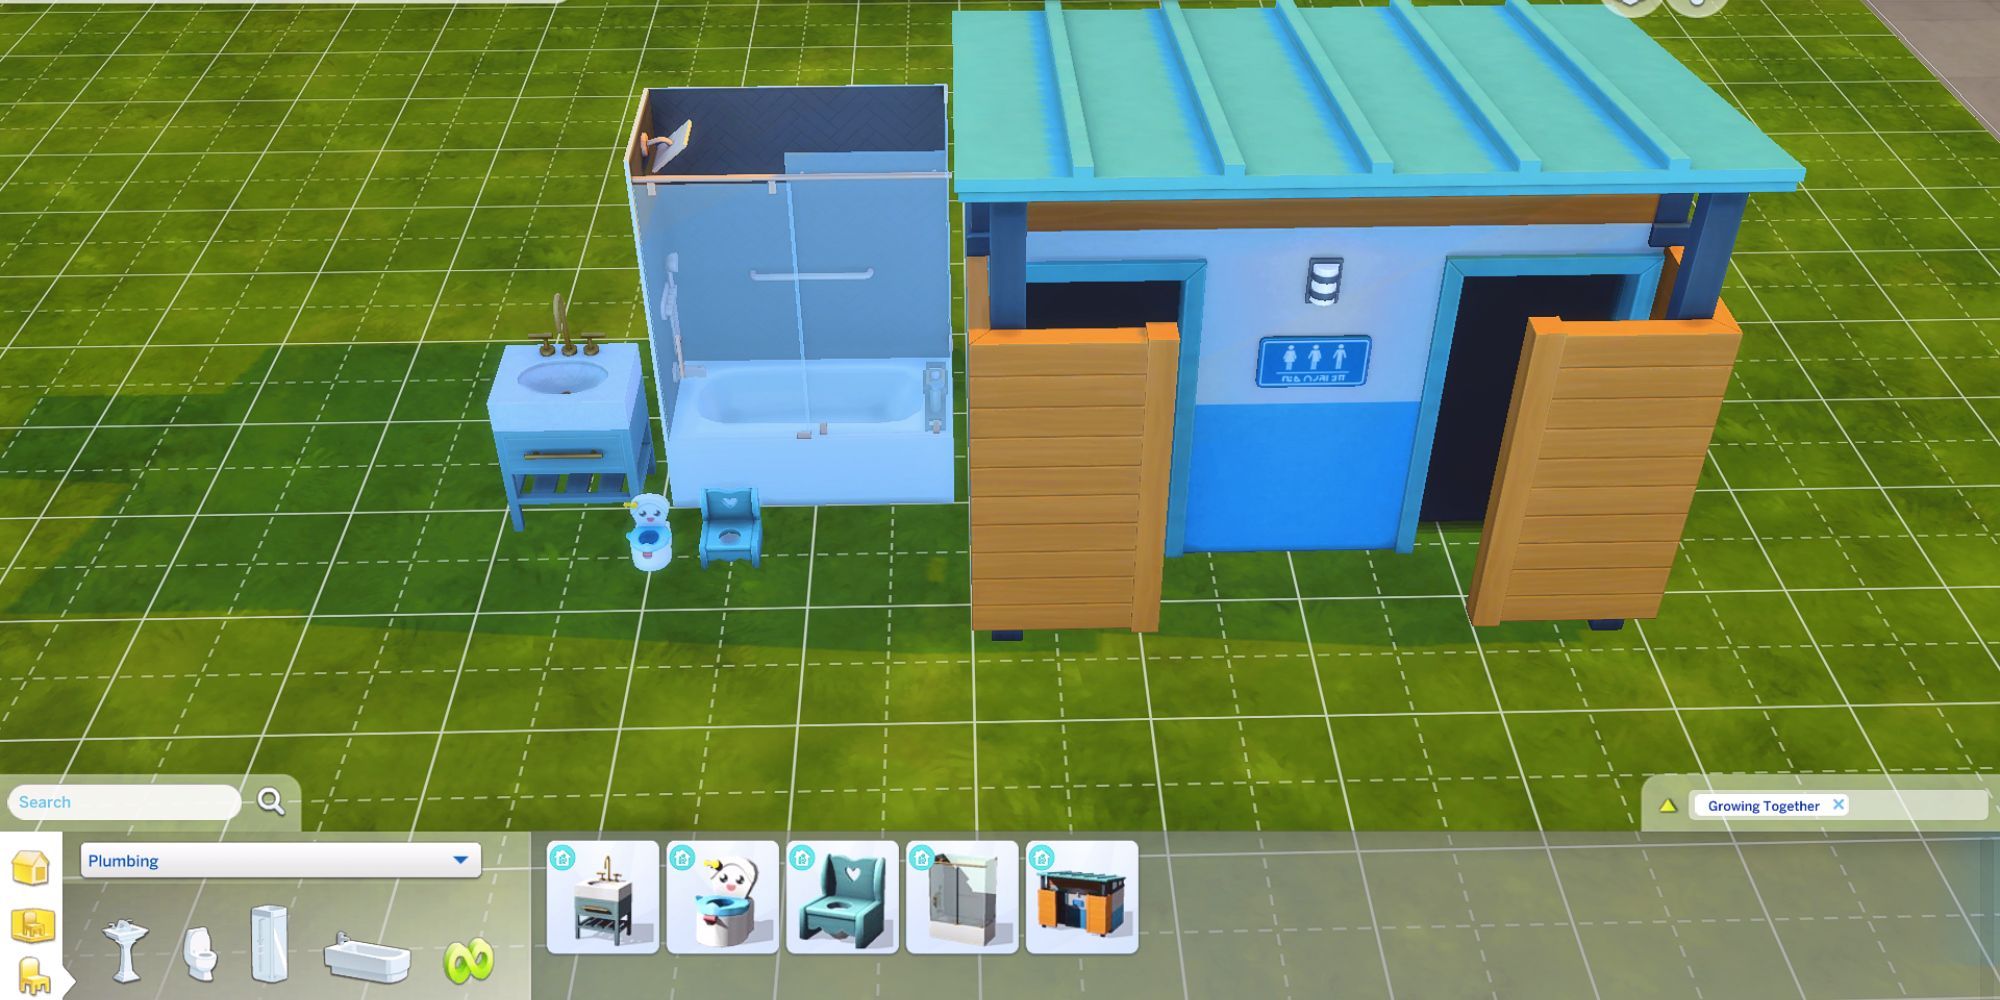 The Sims 4 grow together plumbing